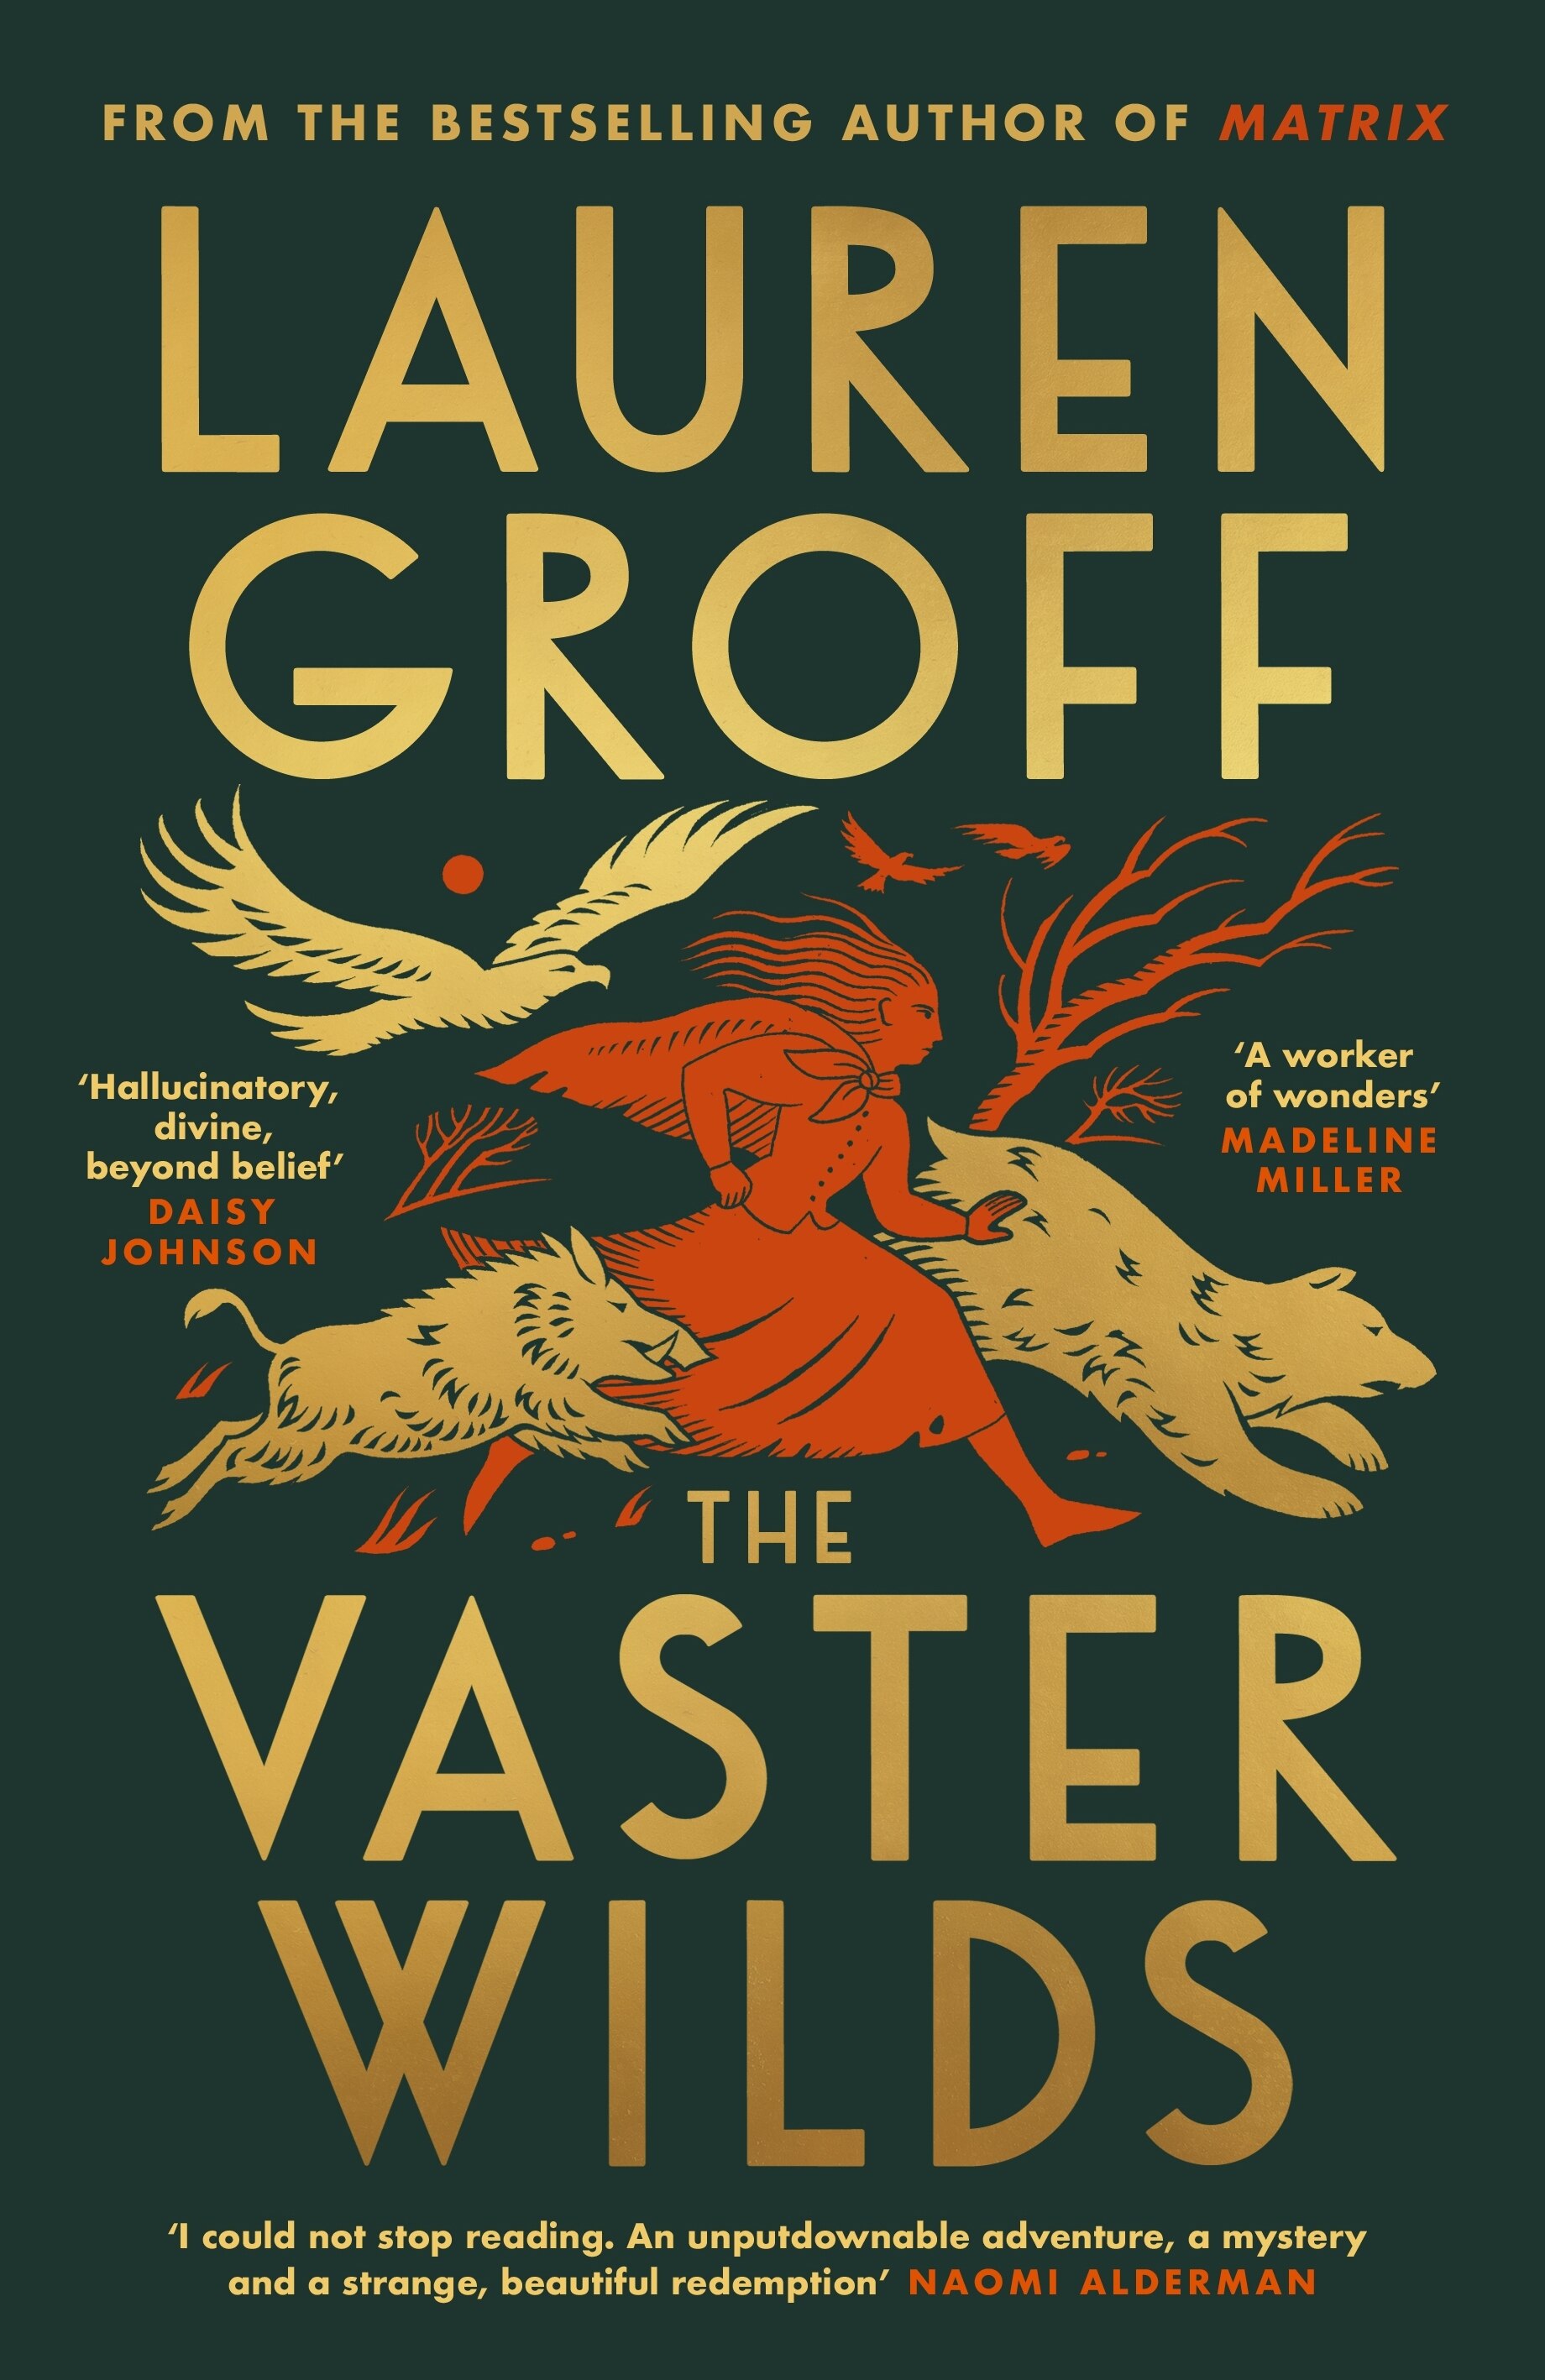 A dark green book cover with gold text and an illustration of a girl in red running alongside a boar, a bear and a hawk